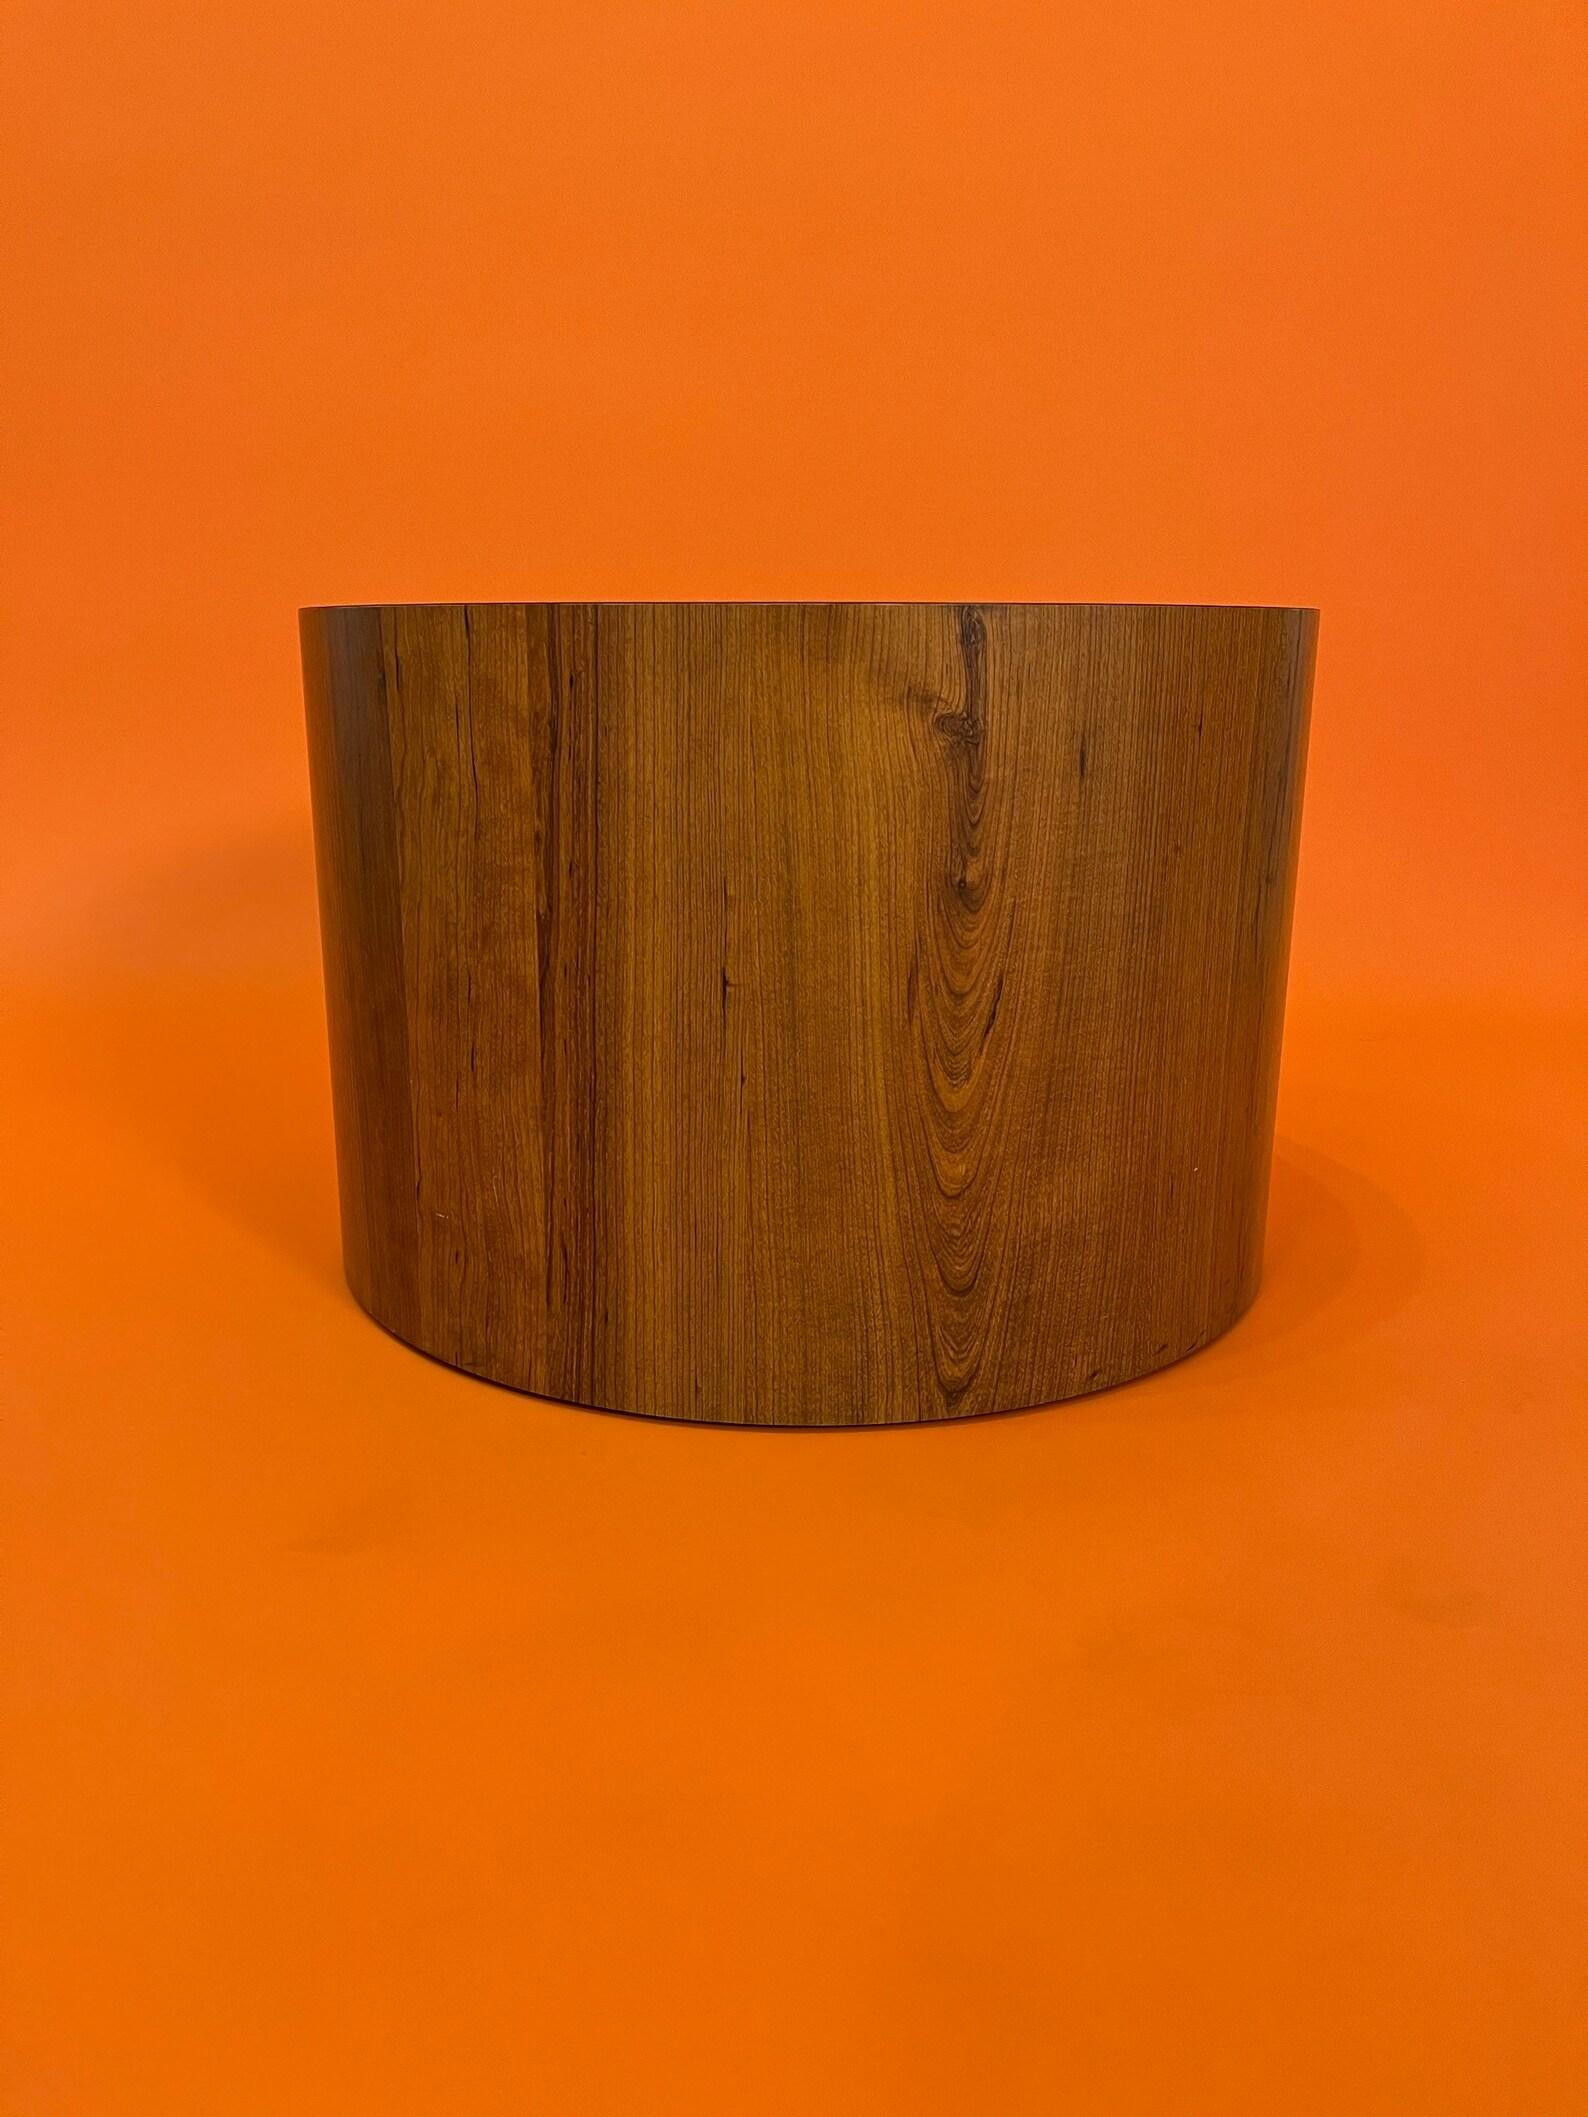 Mid-20th Century Midcentury Teak Circle Drum Shaped Coffee Table End Table 1970s circa For Sale